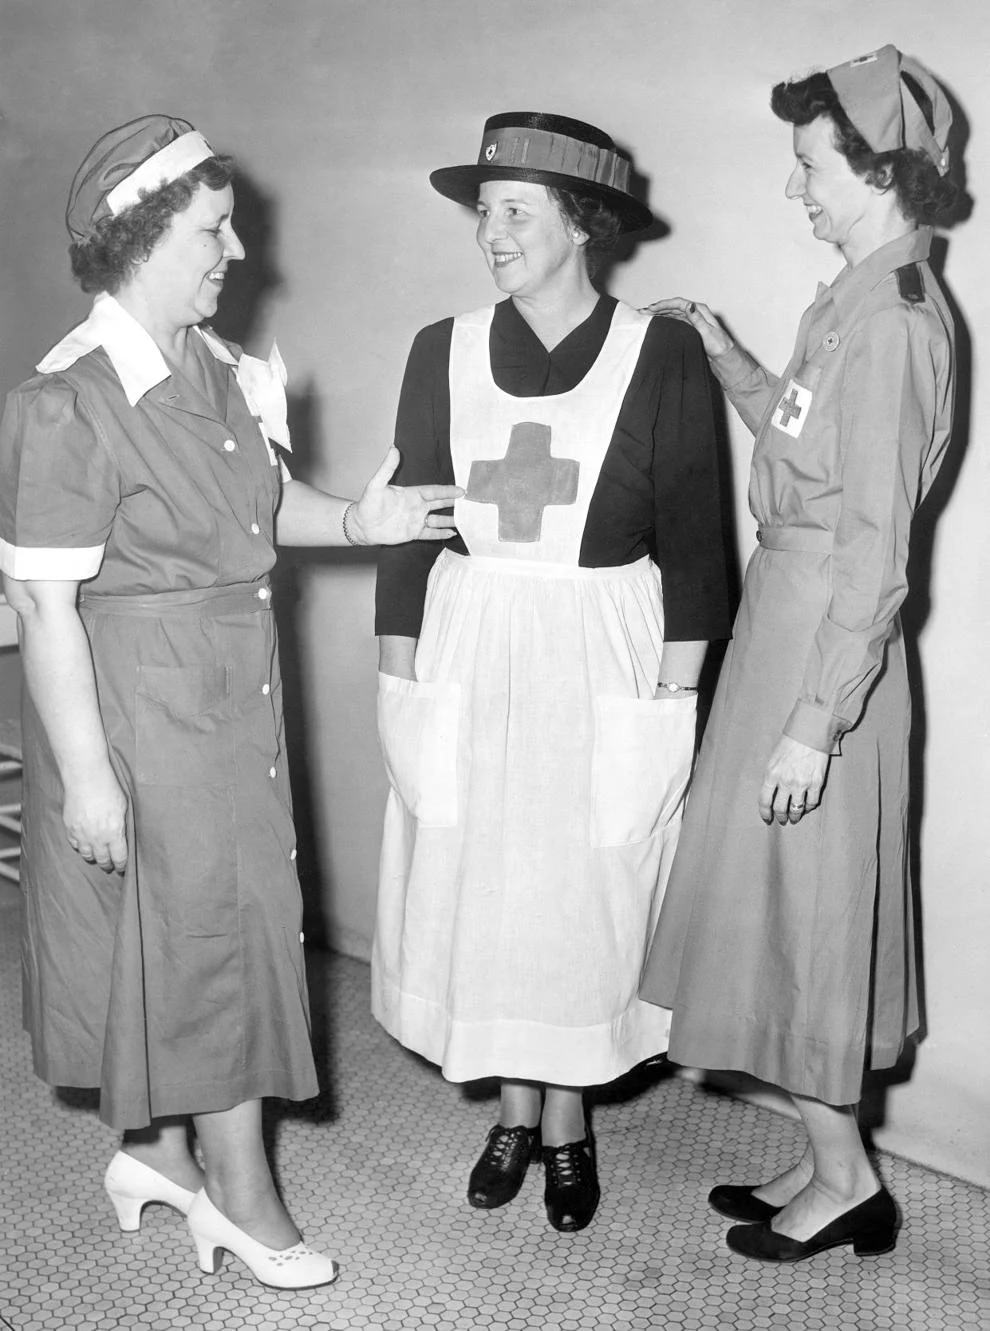 Three American Red Cross canteeners, representing three war periods, gathered for the Richmond chapter’s rally marking the graduation of the first group of canteeners to be trained since World War II, 1951.